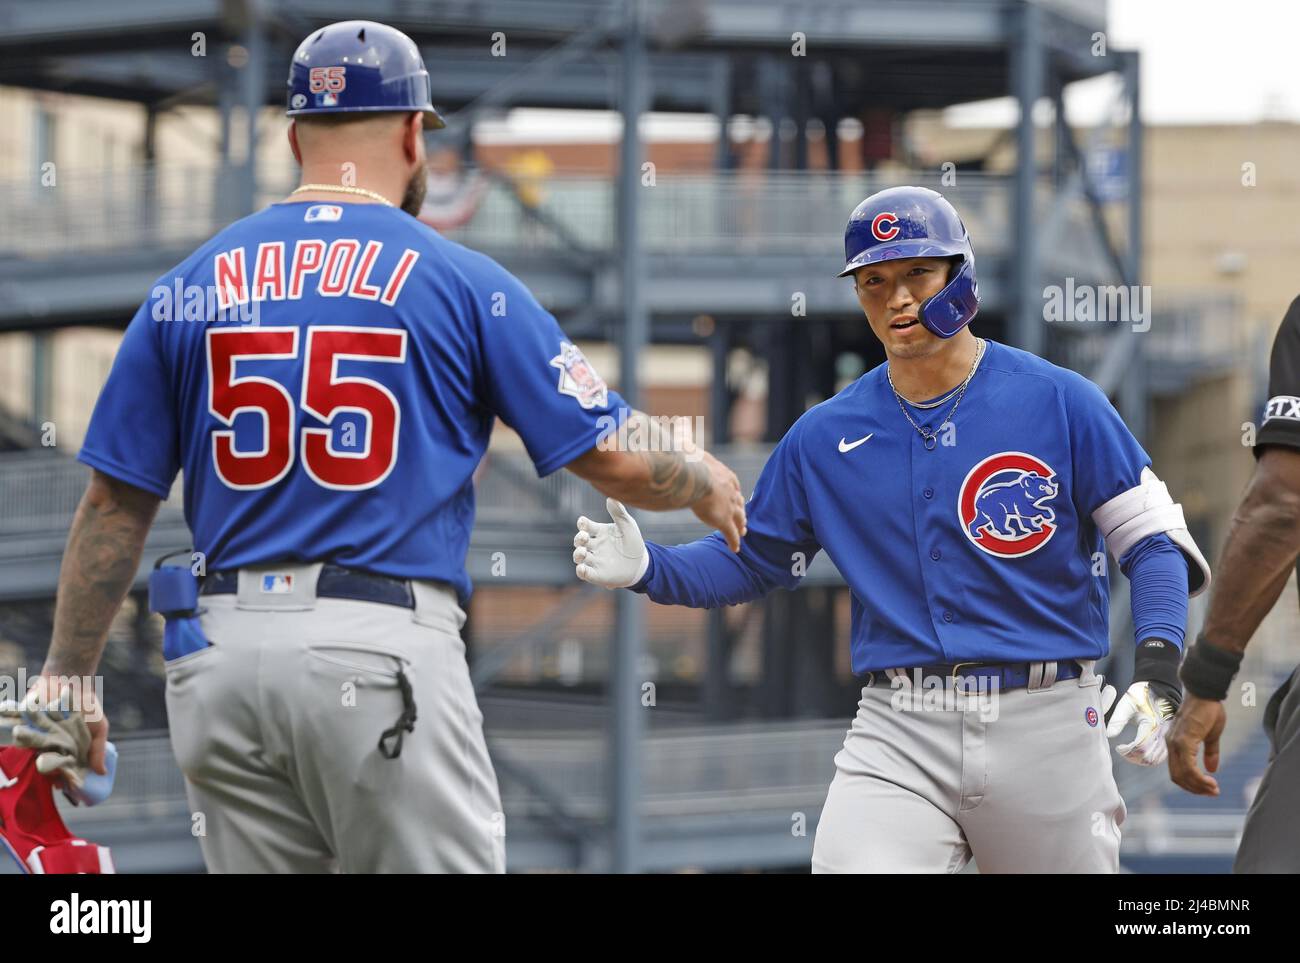 The Chicago Cubs' Seiya Suzuki (R) is congratulated by first base